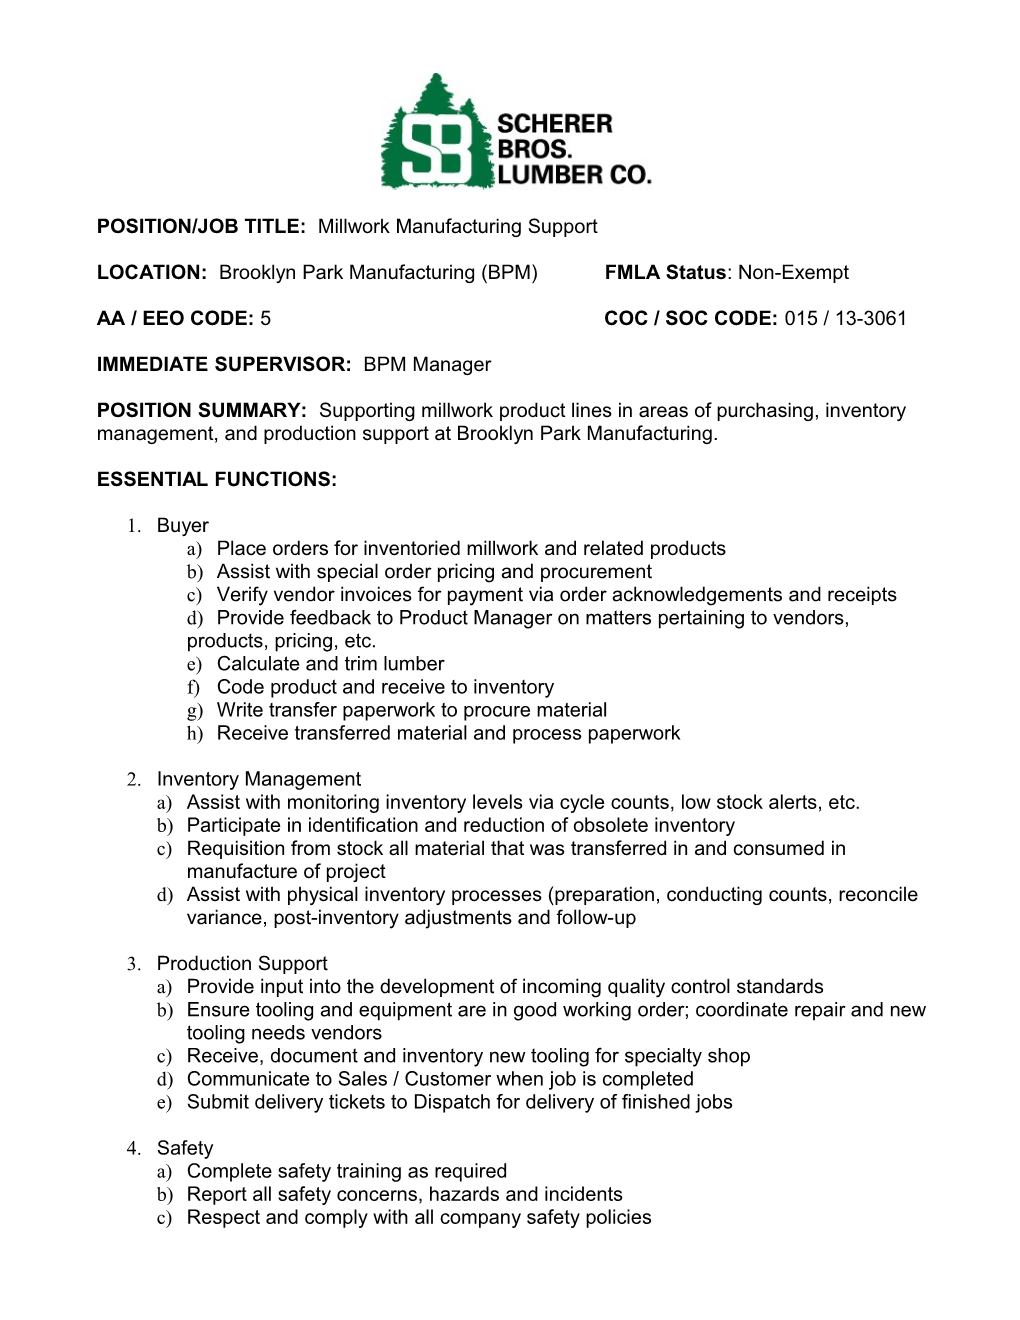 POSITION/JOB TITLE: Millwork Manufacturing Support